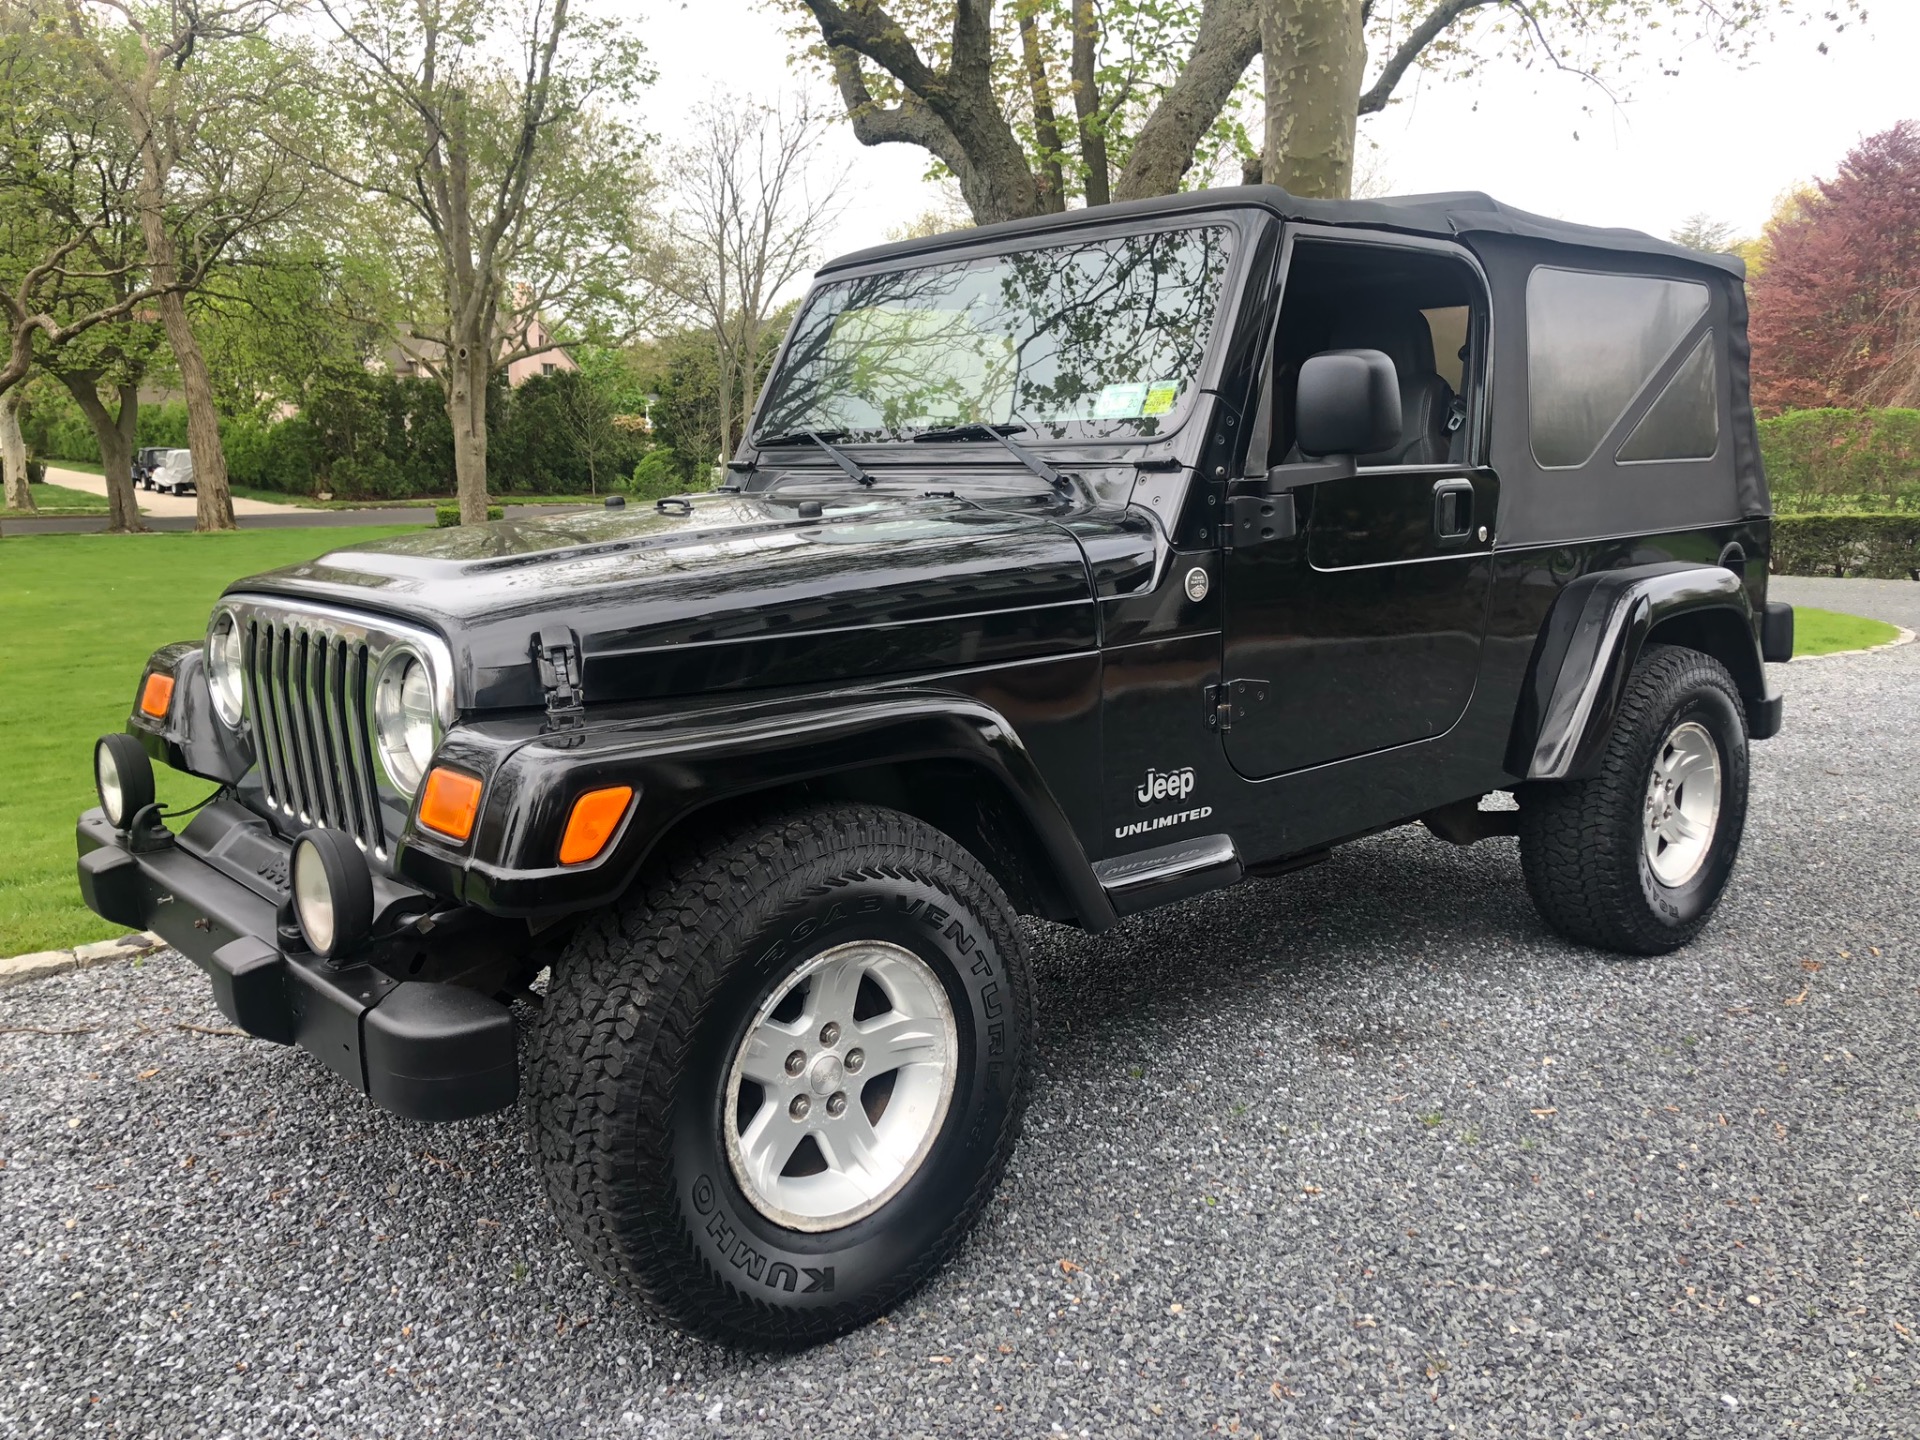 Used 2006 Jeep Wrangler Unlimited LJ Unlimited For Sale ($12,900) | Legend  Leasing Stock #9146